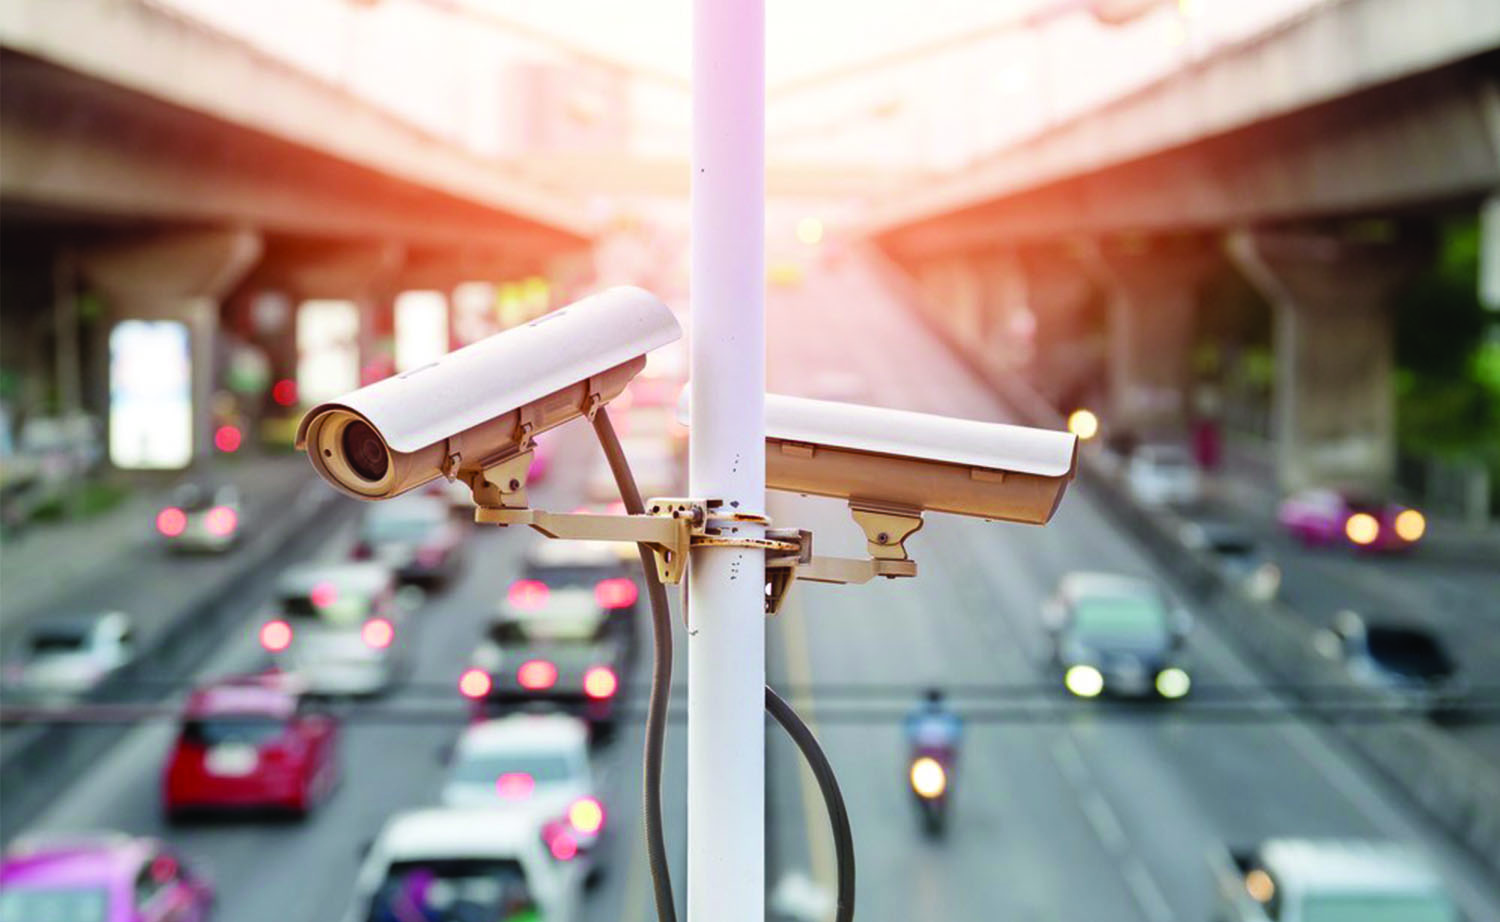 What is the process of CCTV camera installation?